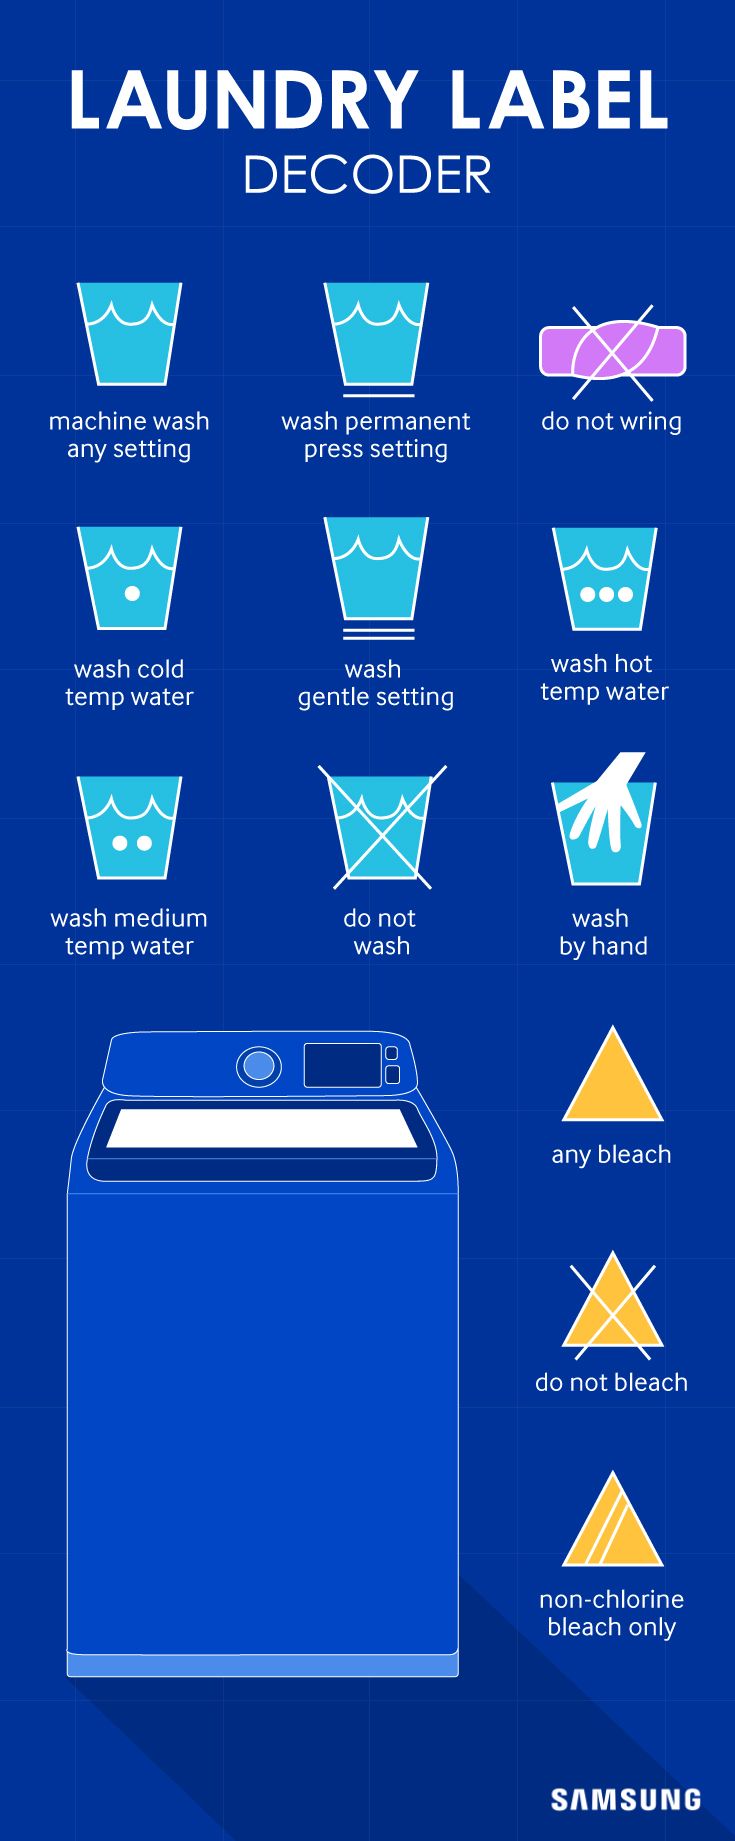 guide to when to wash clothes